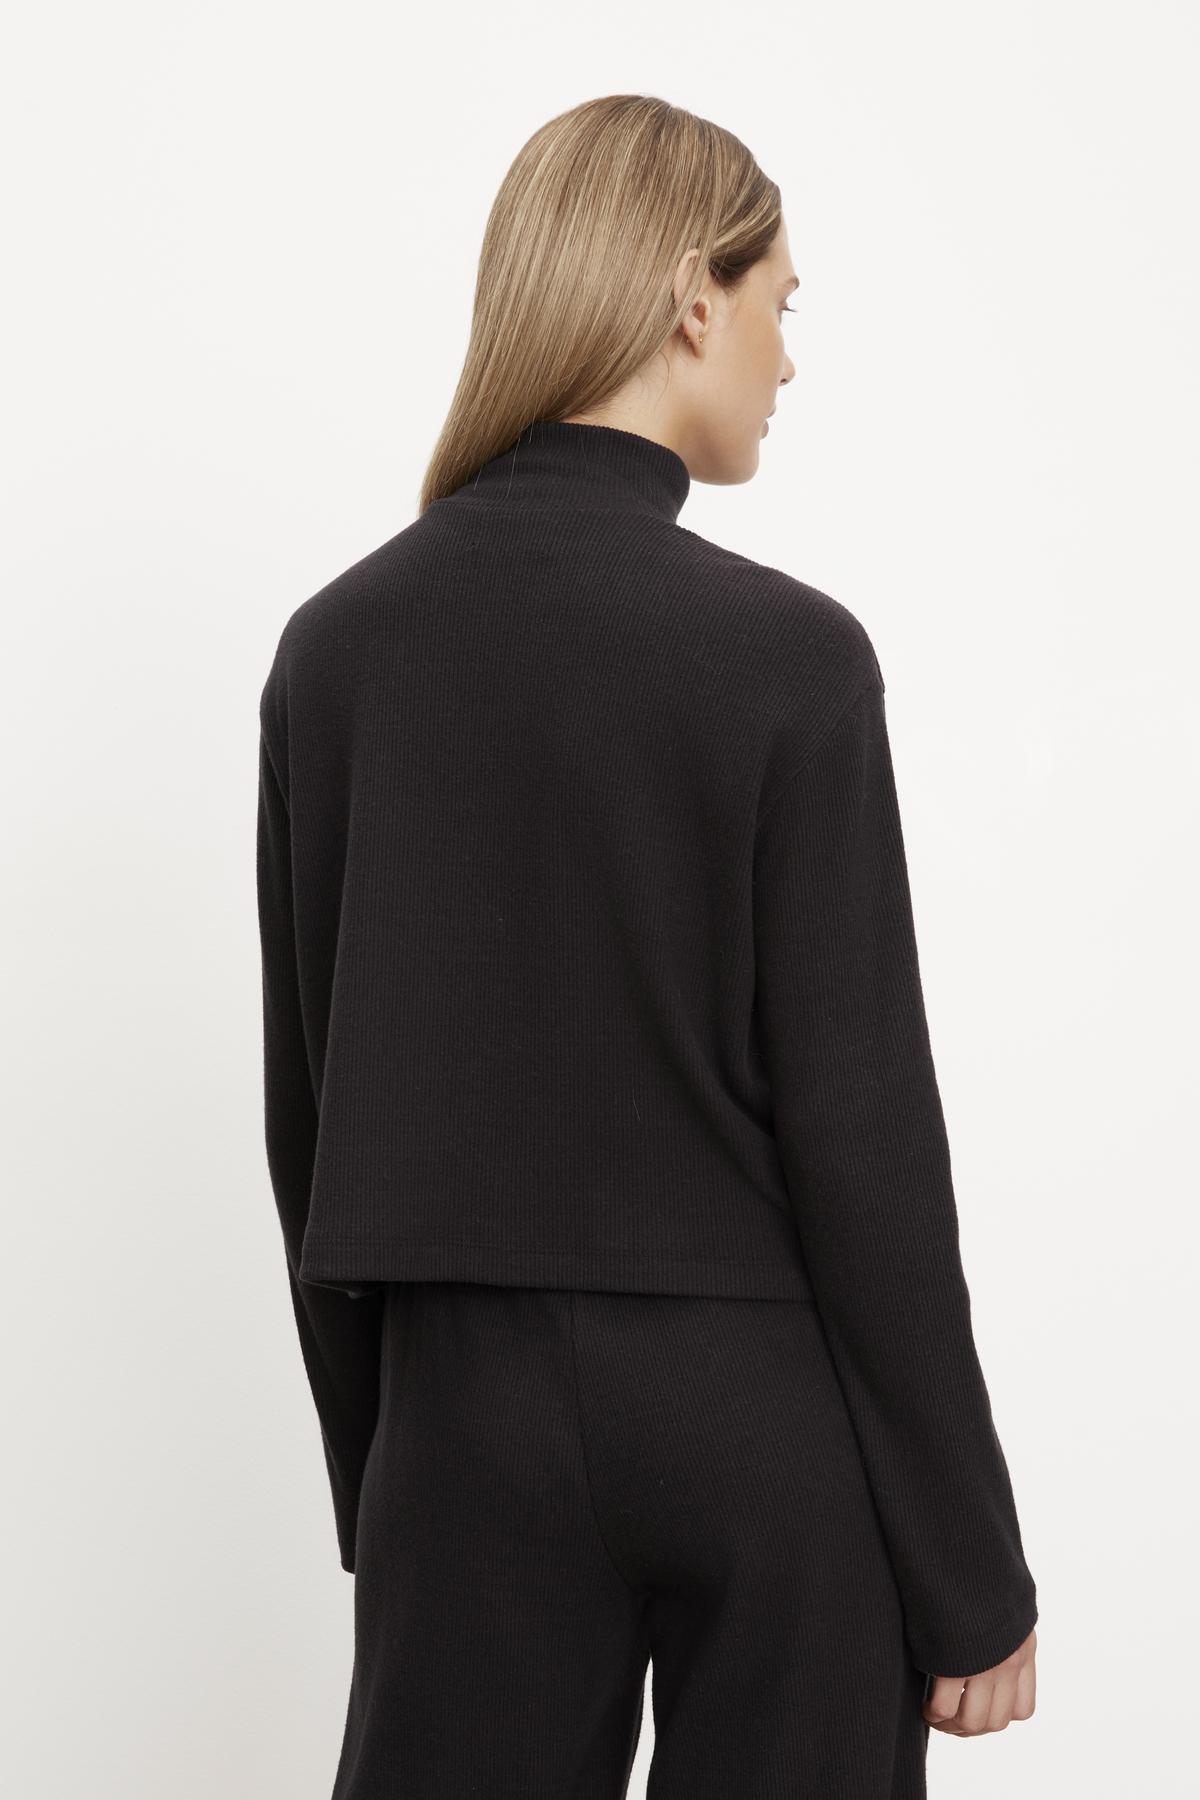 The back view of a person wearing a Velvet by Graham & Spencer ALEC BRUSHED RIB TURTLENECK TOP.-35701823537345